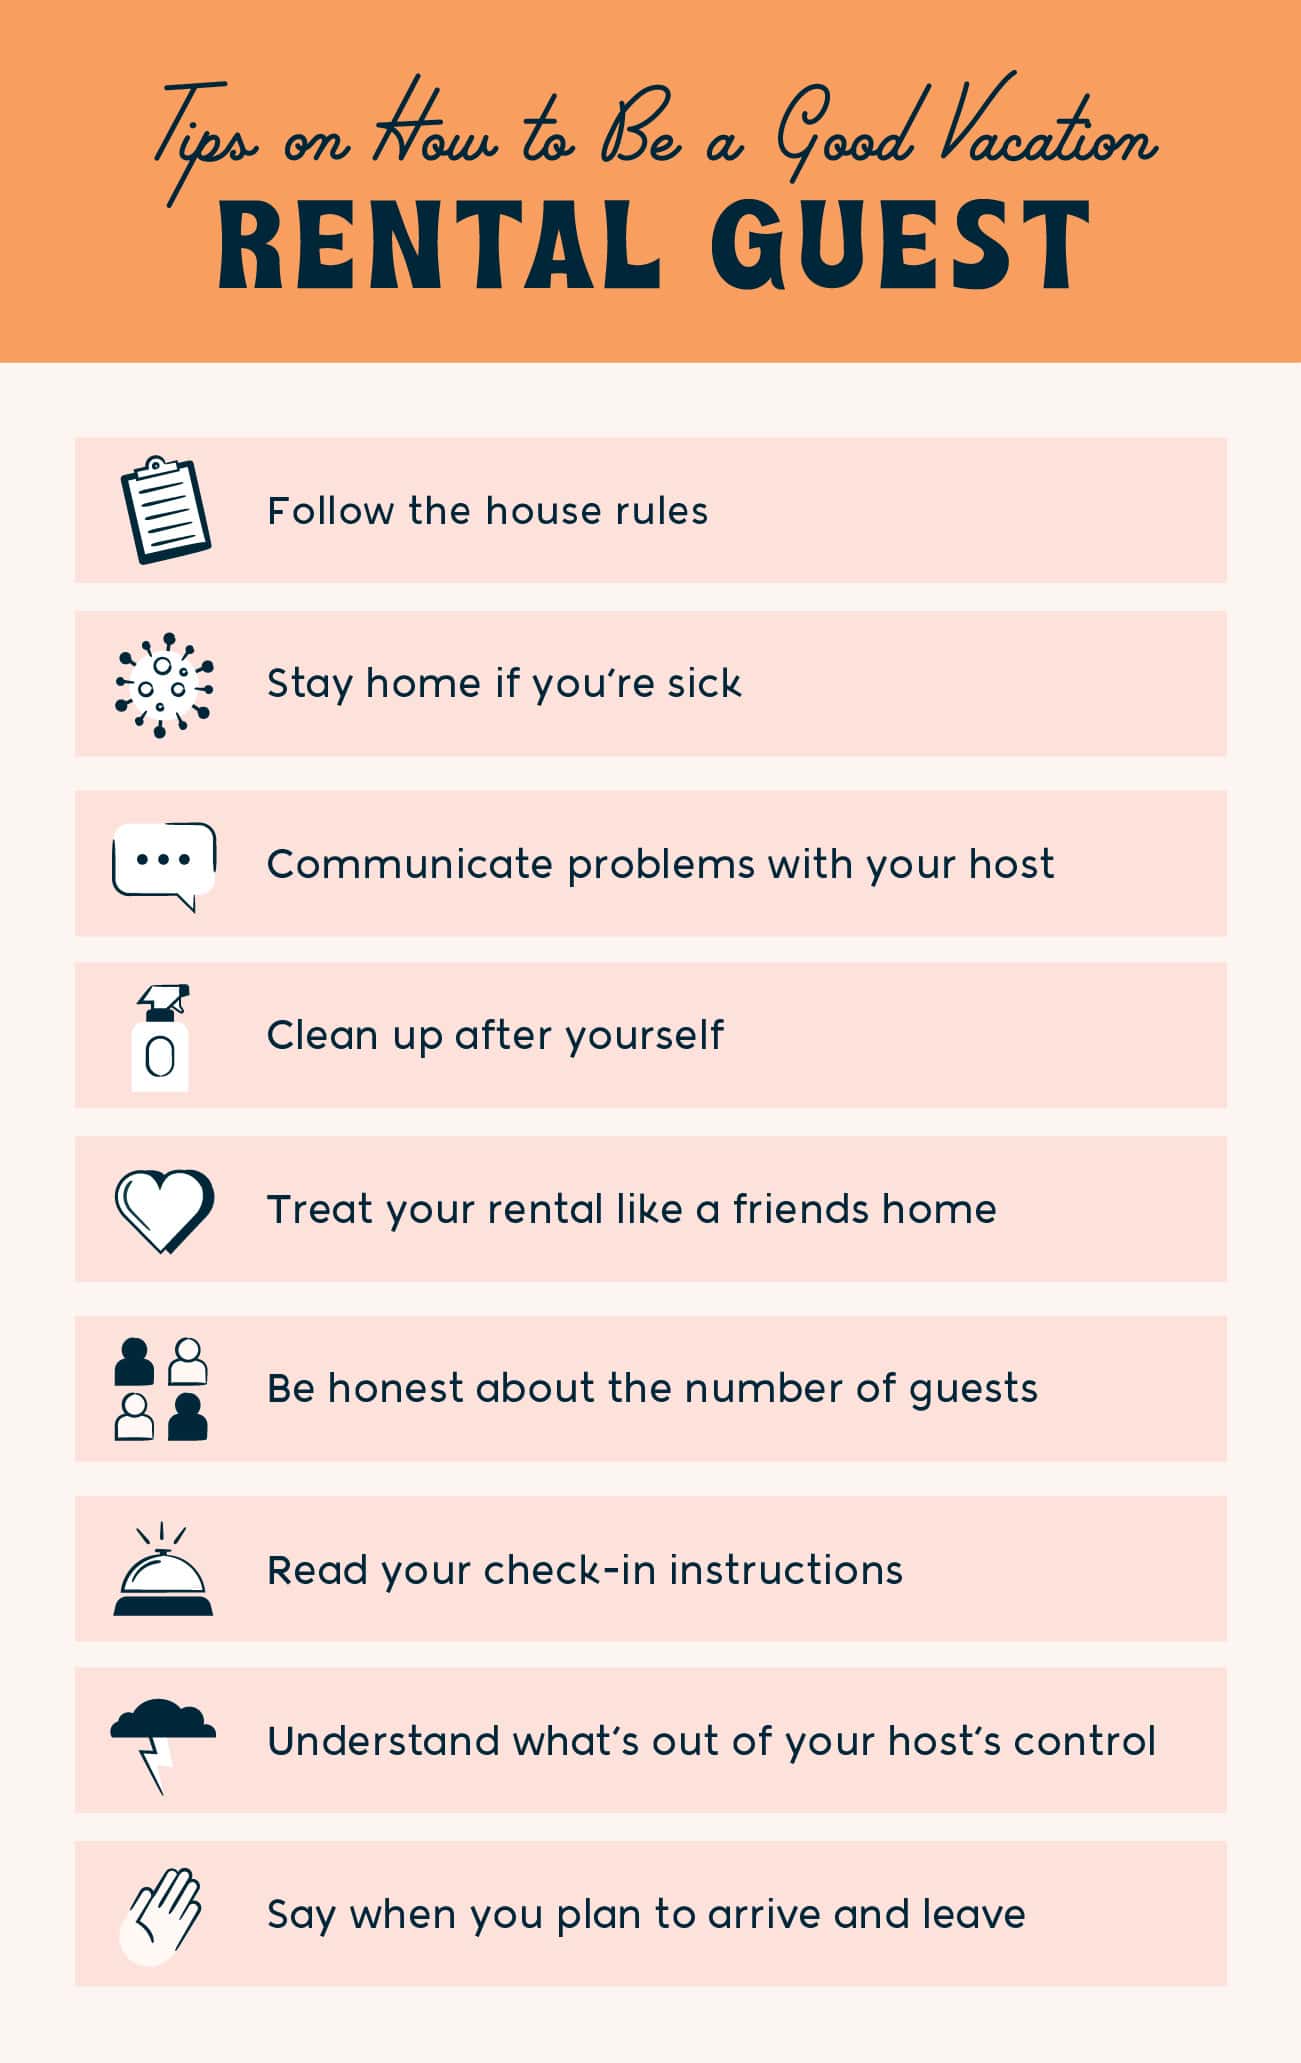 How To Be A Good Rental Guest